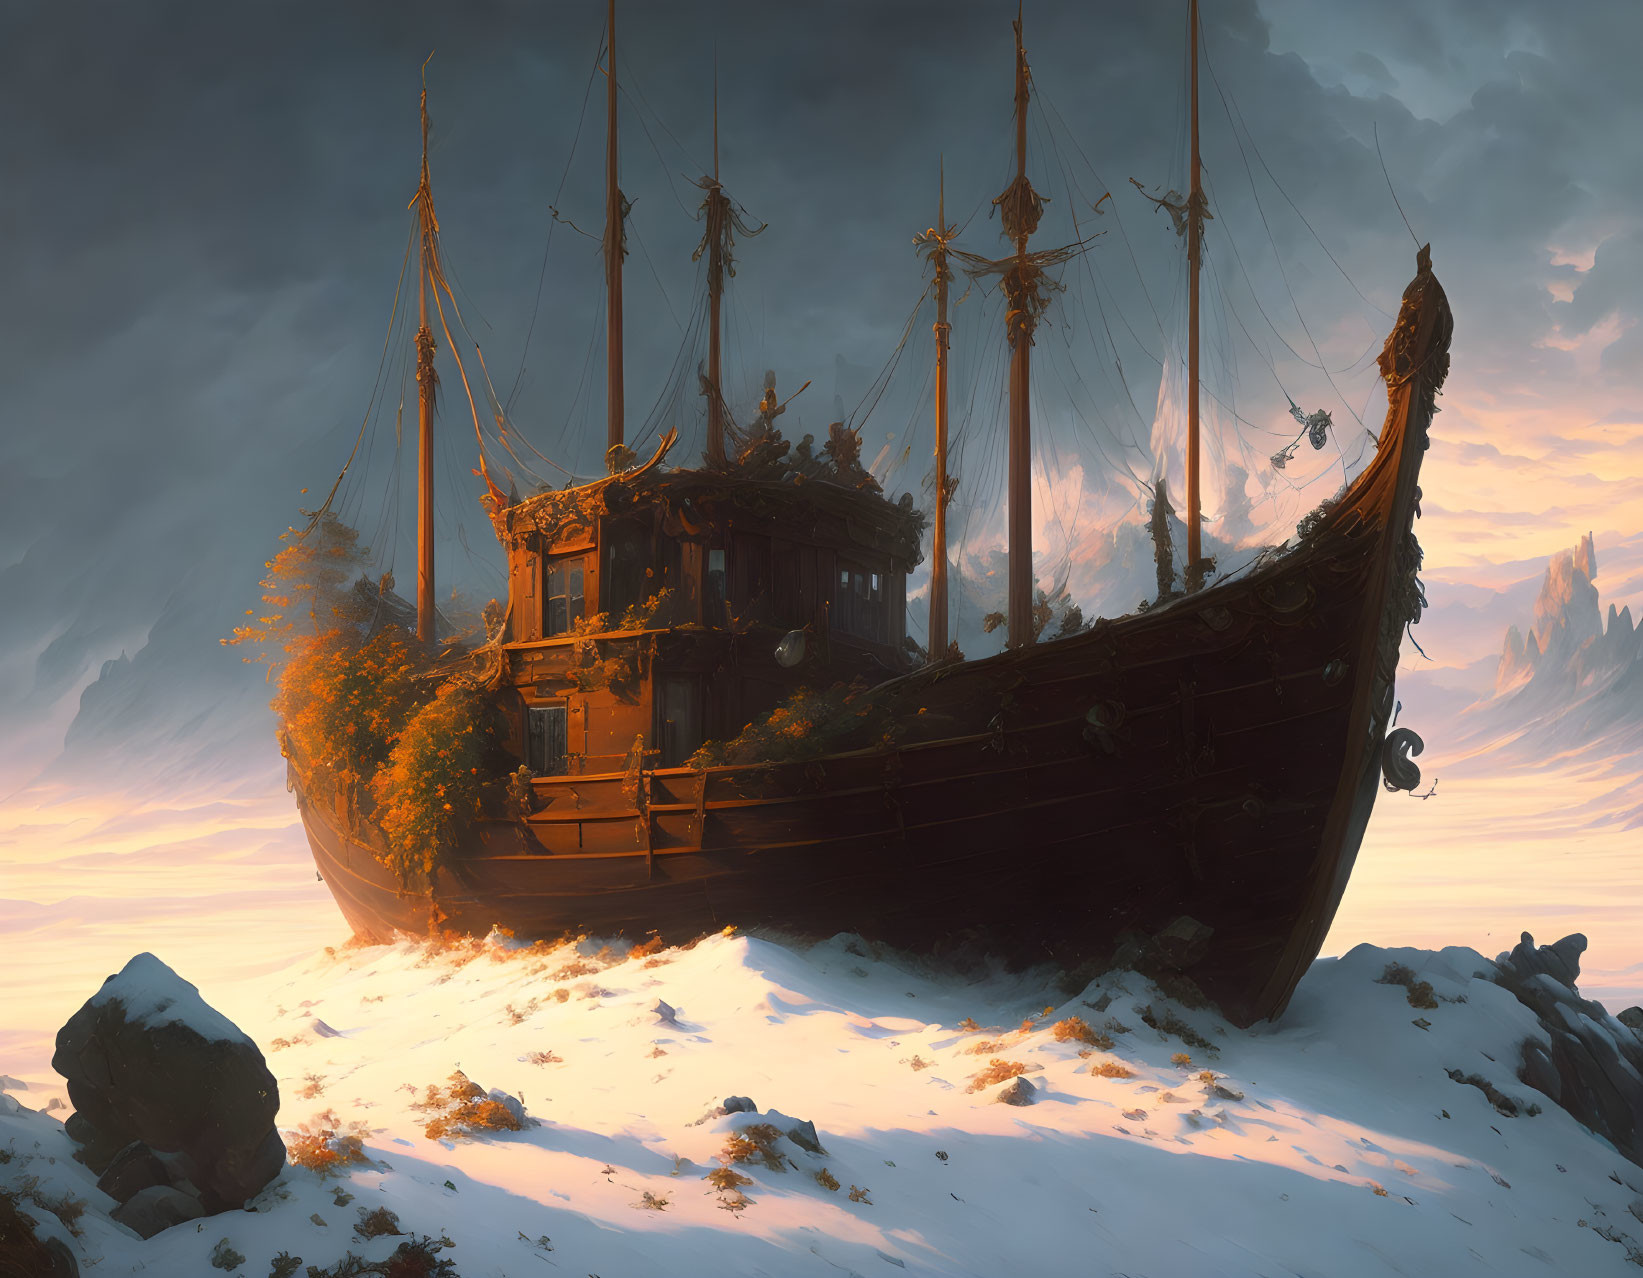 Ancient ship on snowy hilltop with dramatic sky